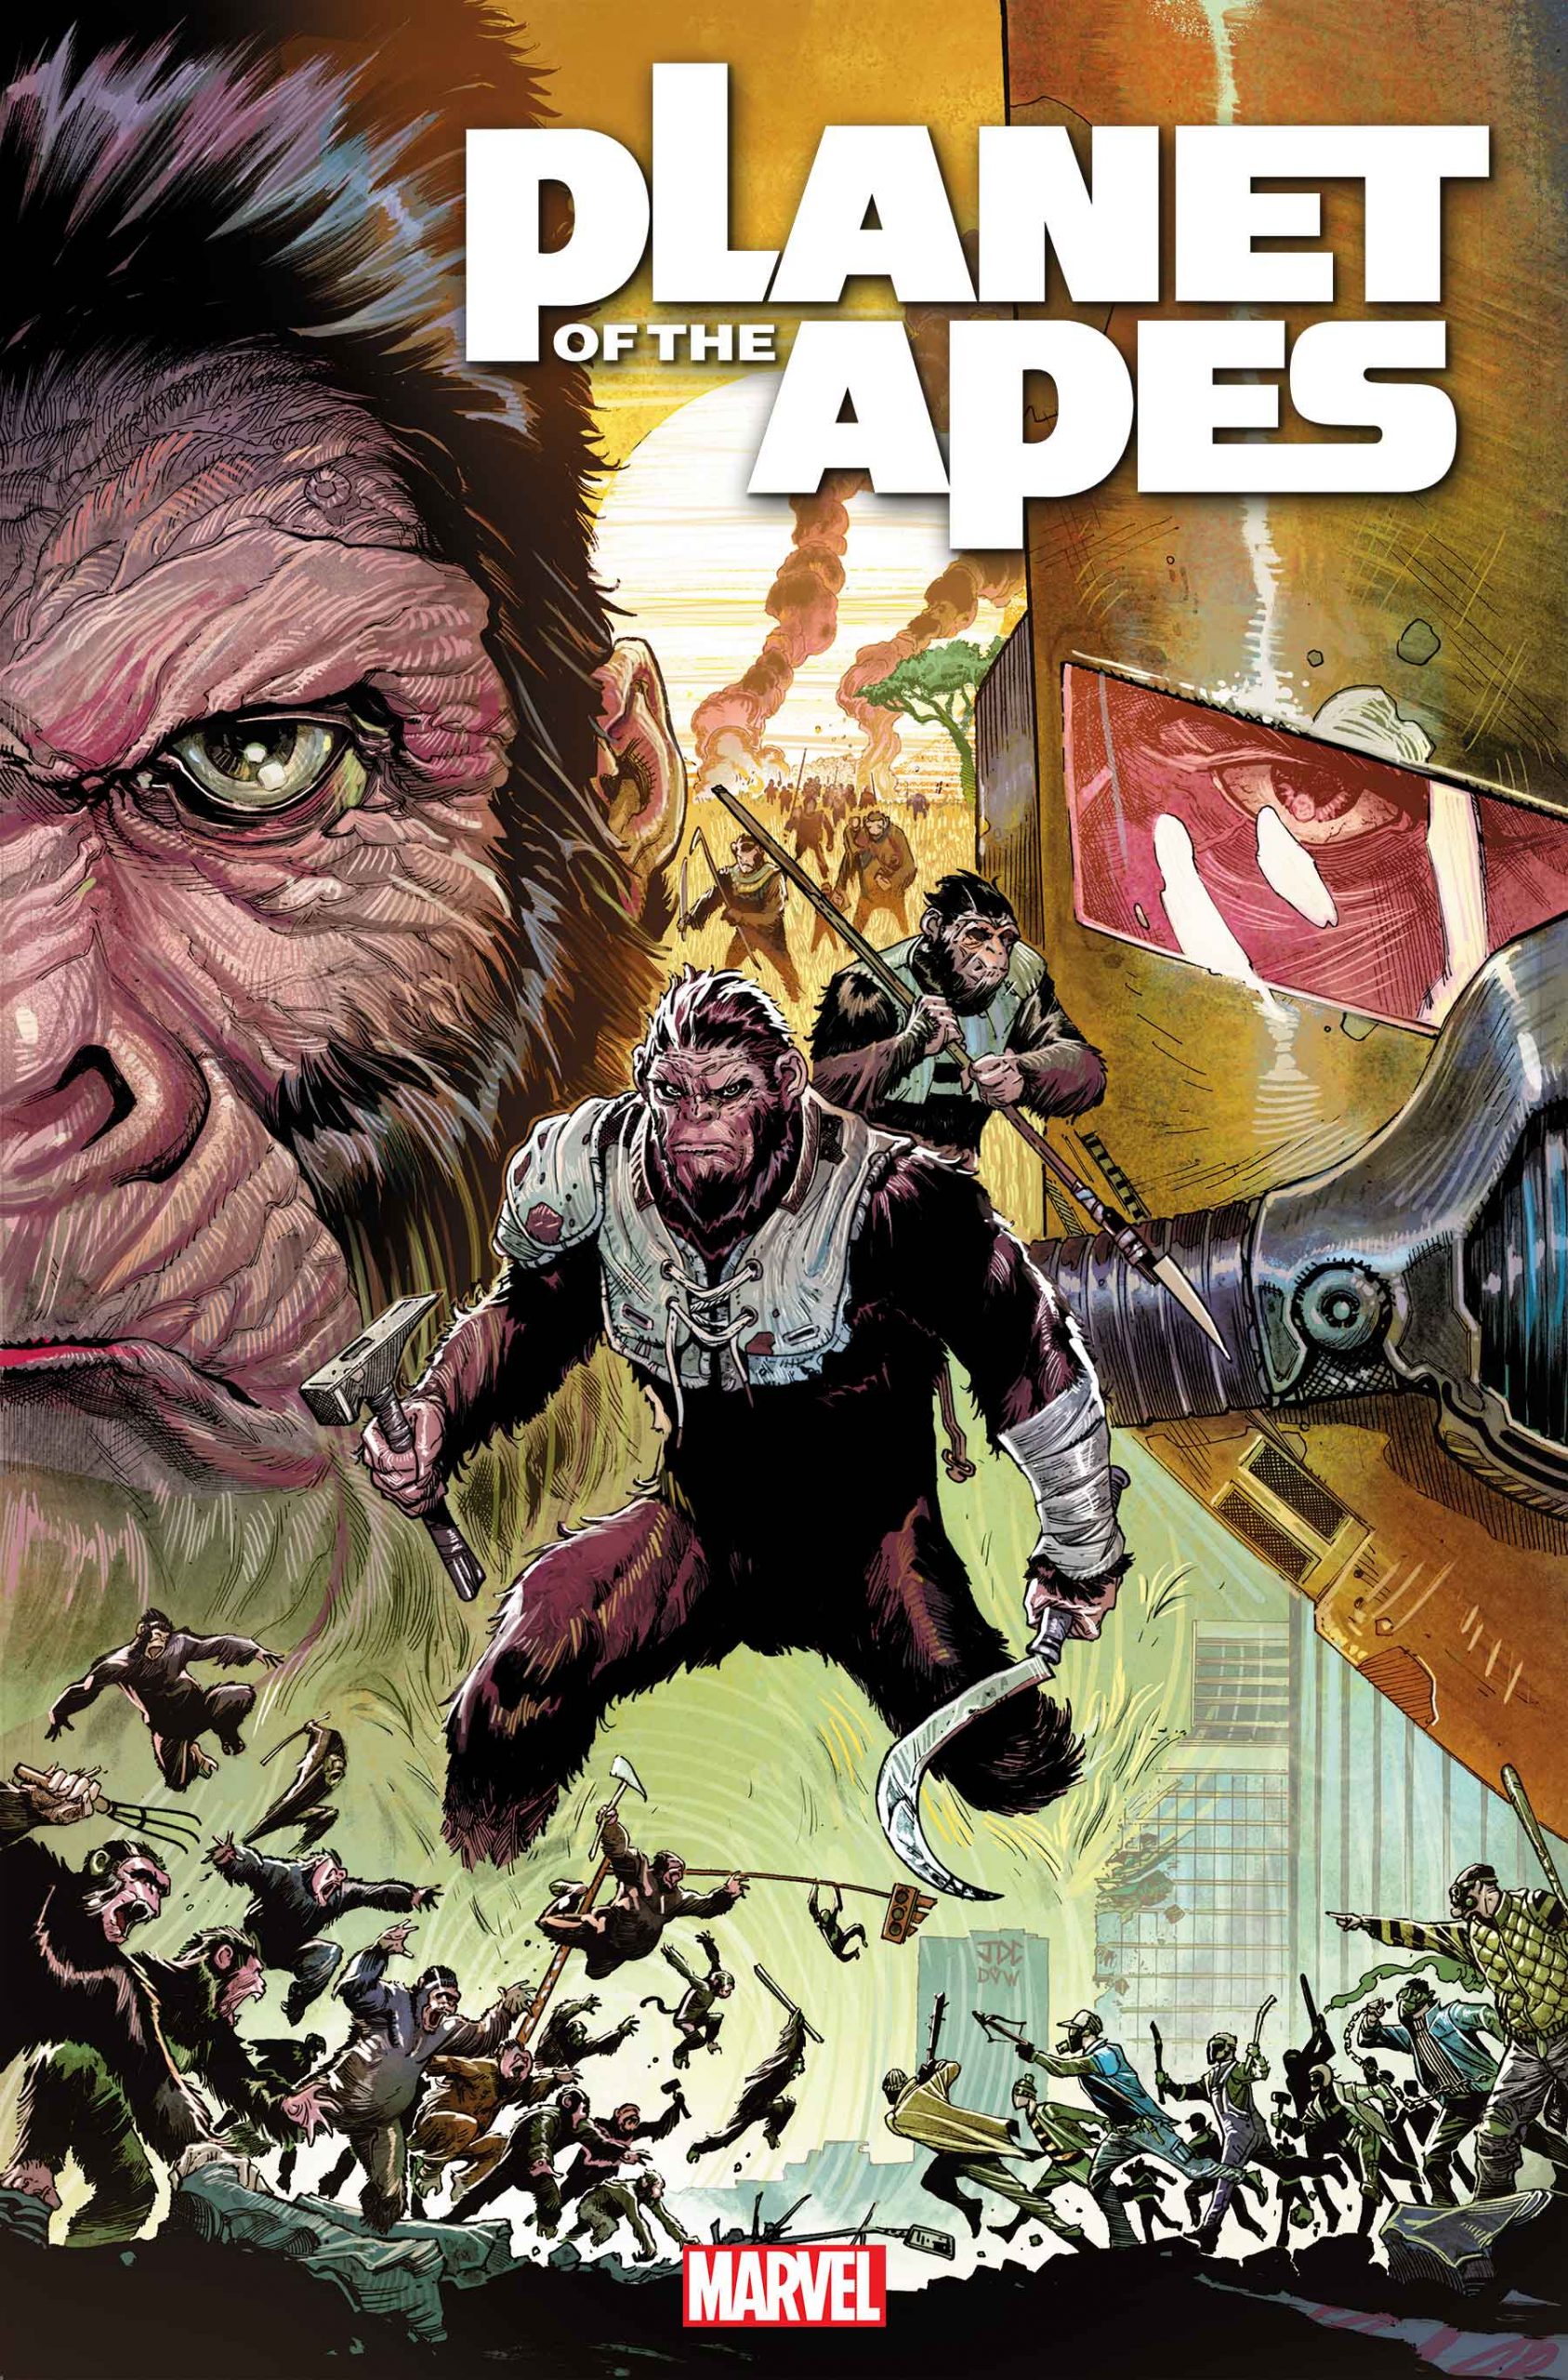 Marvel sheds light on 'Planet of the Apes'